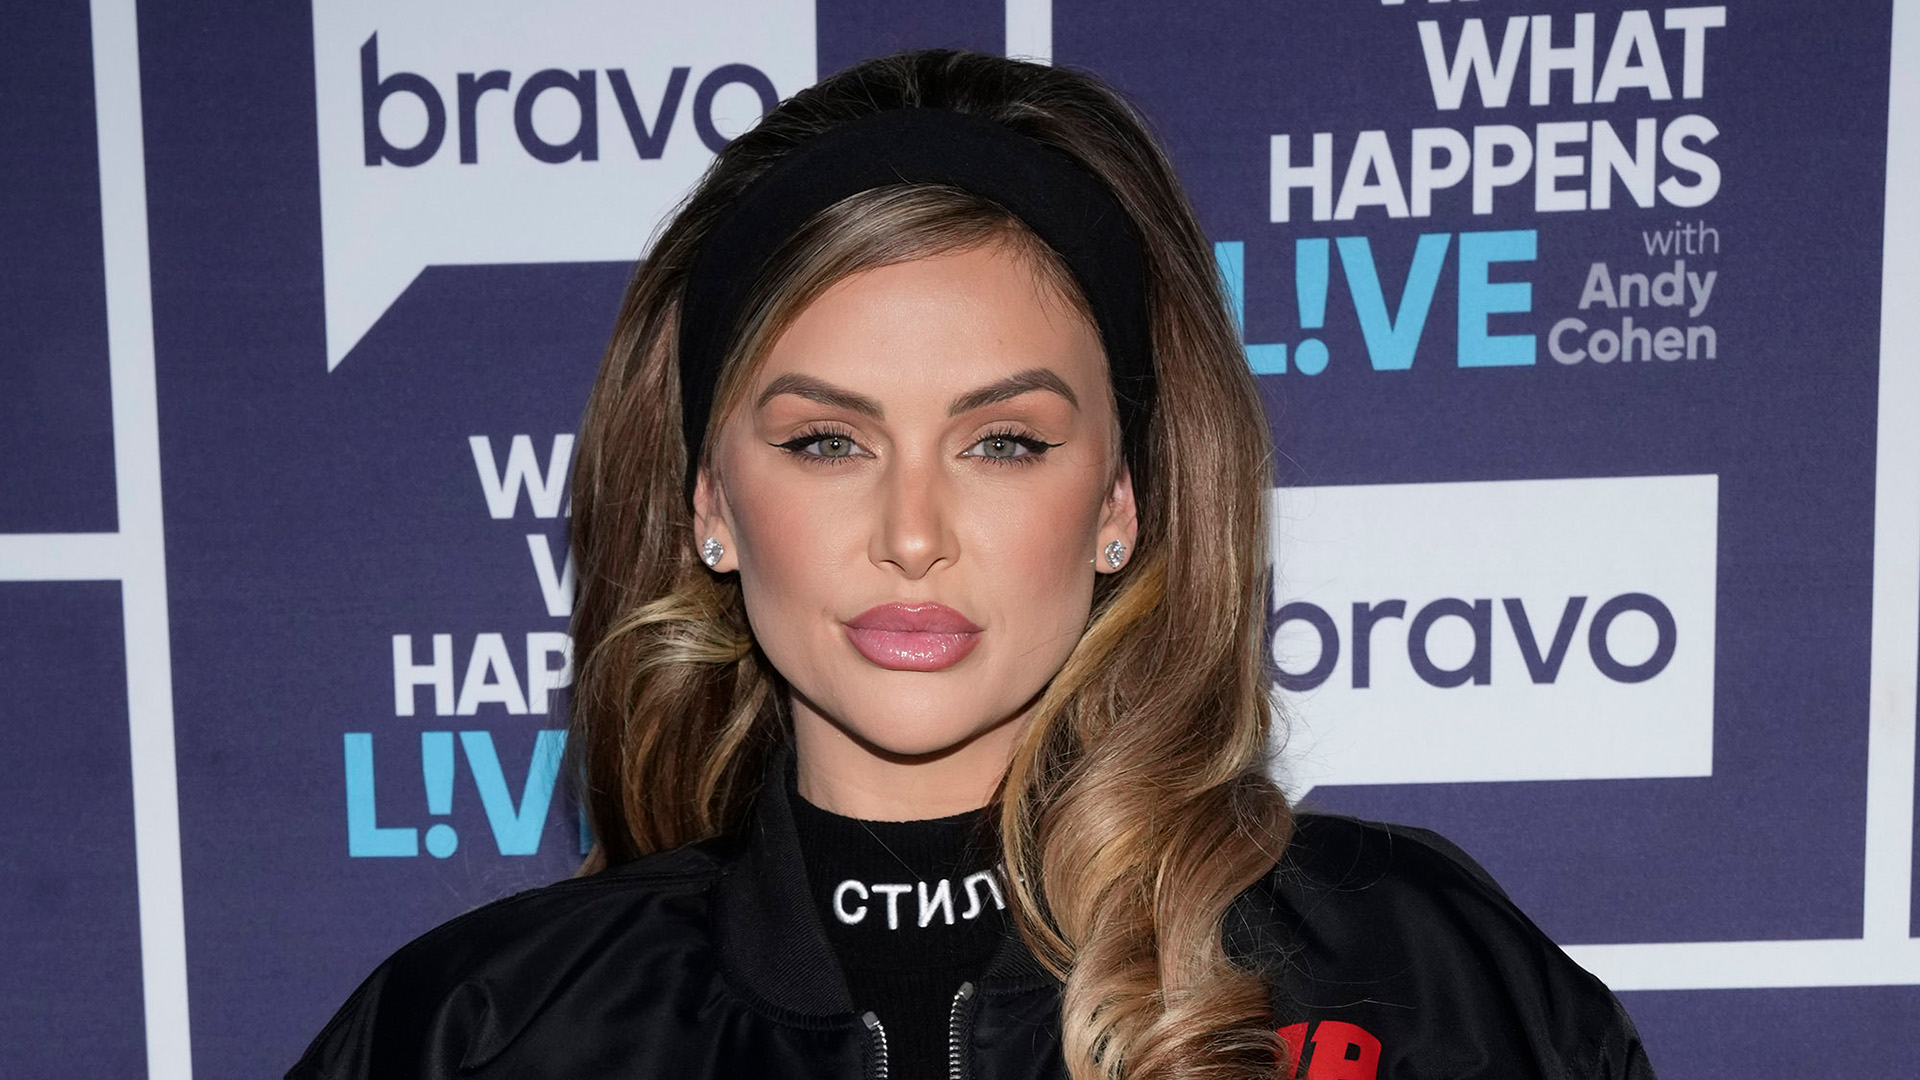 WATCH WHAT HAPPENS LIVE WITH ANDY COHEN -- Episode 21018 -- Pictured: Lala Kent -- (Photo by: Charles Sykes/Bravo via Getty Images)